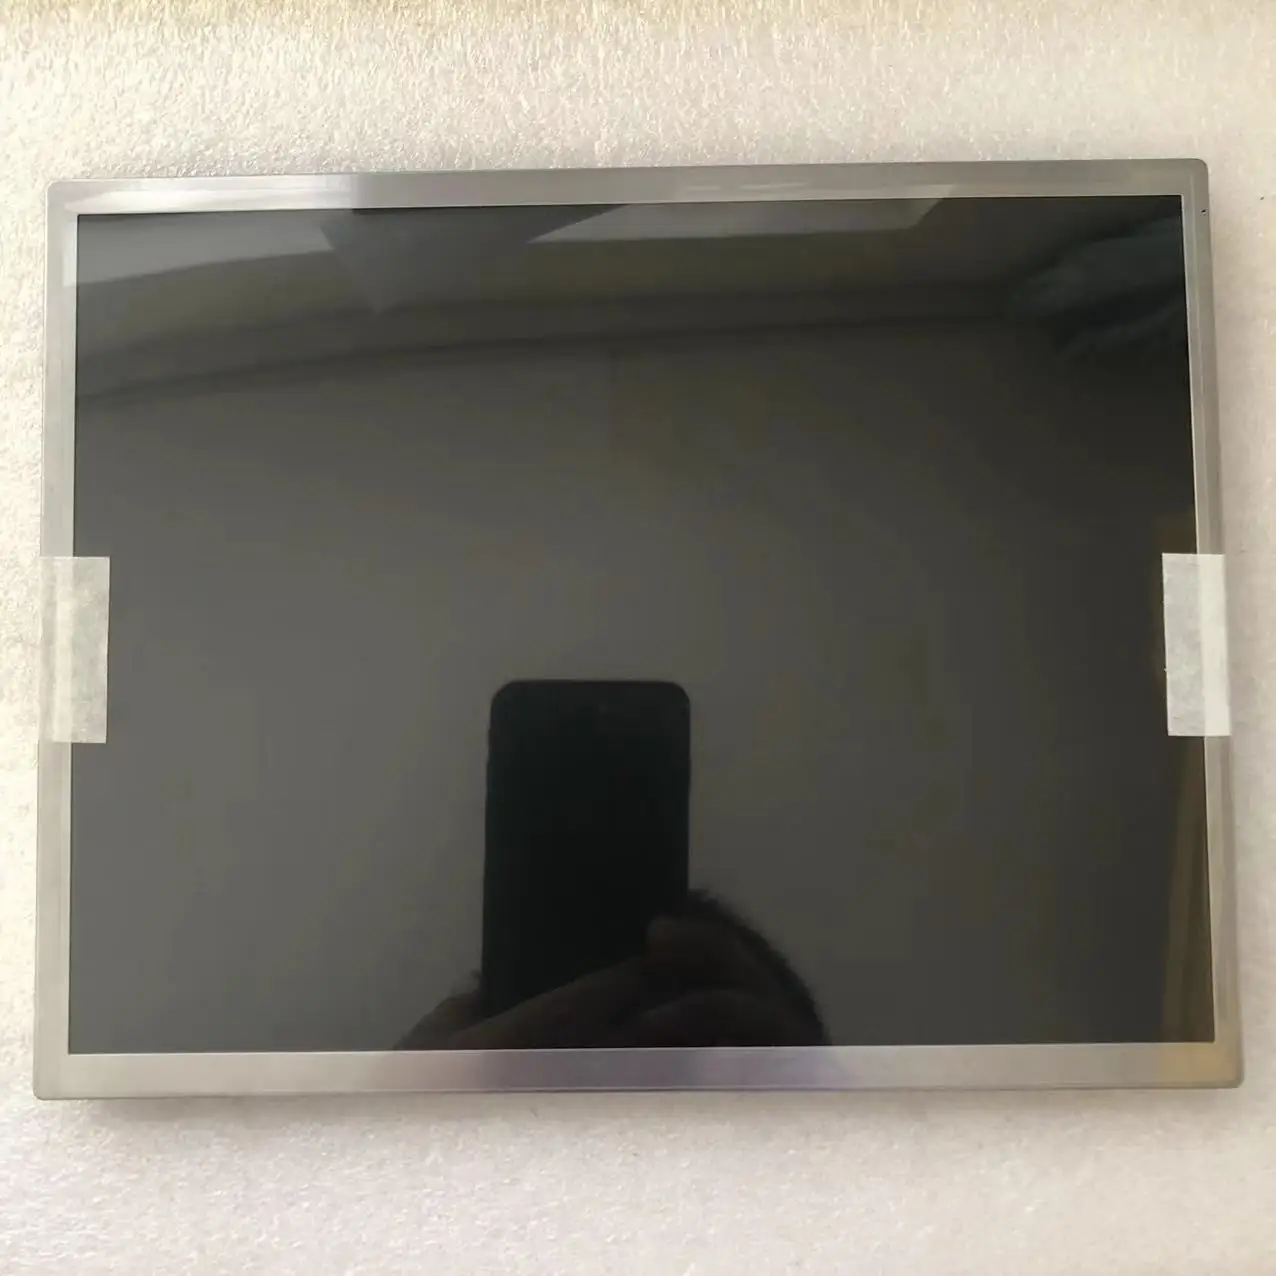 For 8.4-inch NL6448AC33-A1D LCD Screen Display Panel Fully Tested Before Shipment for original 7 5 inch kcg075vg2be g005 lcd screen display fully tested before shipment